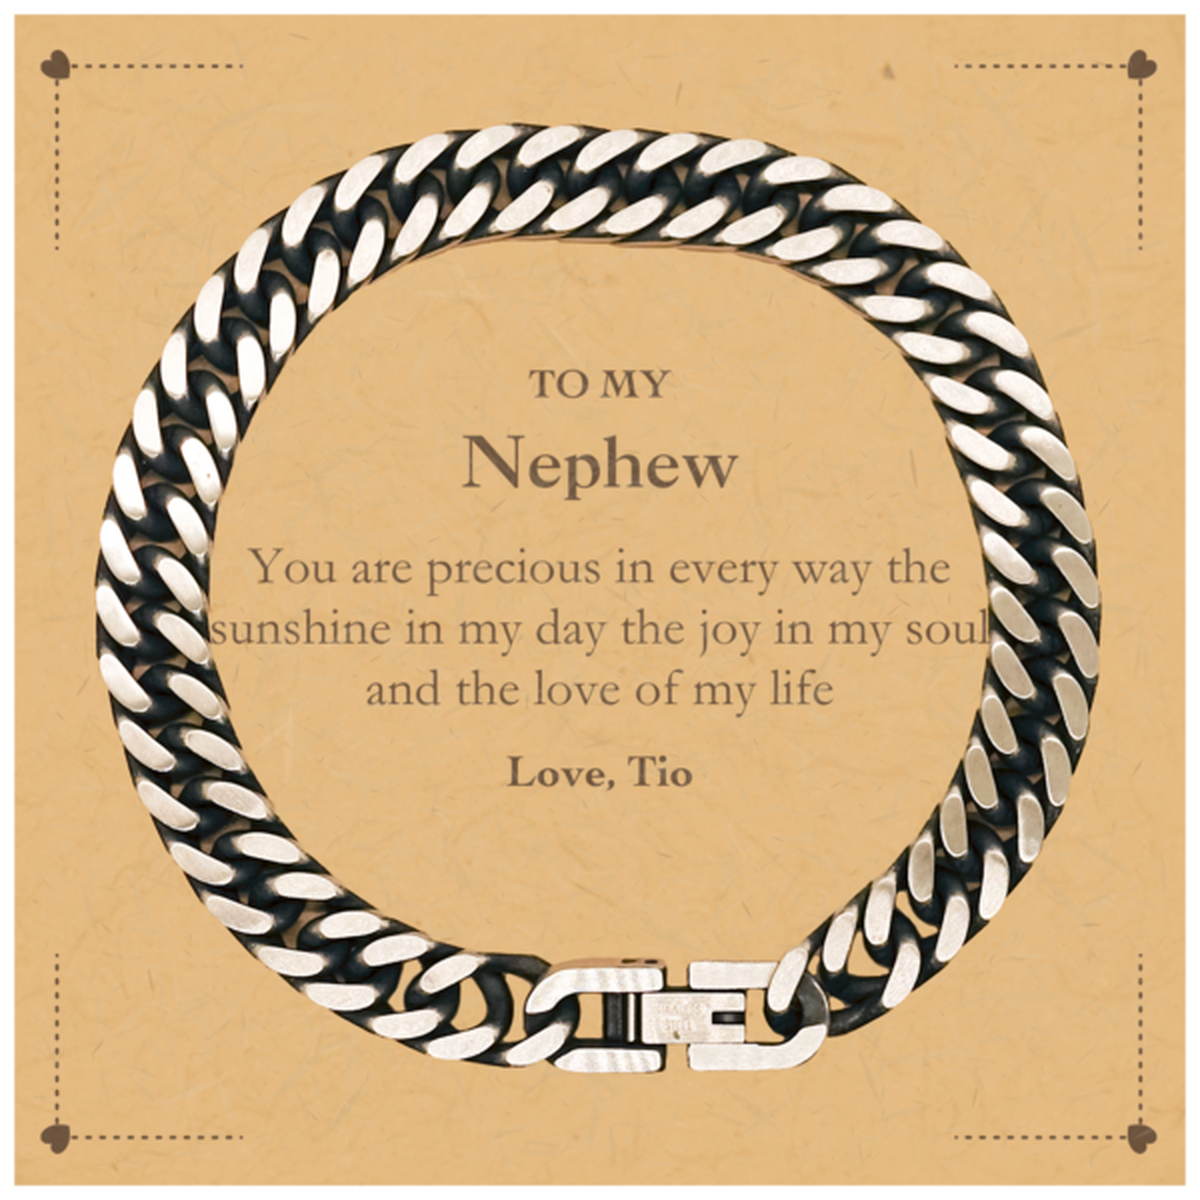 Graduation Gifts for Nephew Cuban Link Chain Bracelet Present from Tio, Christmas Nephew Birthday Gifts Nephew You are precious in every way the sunshine in my day. Love, Tio